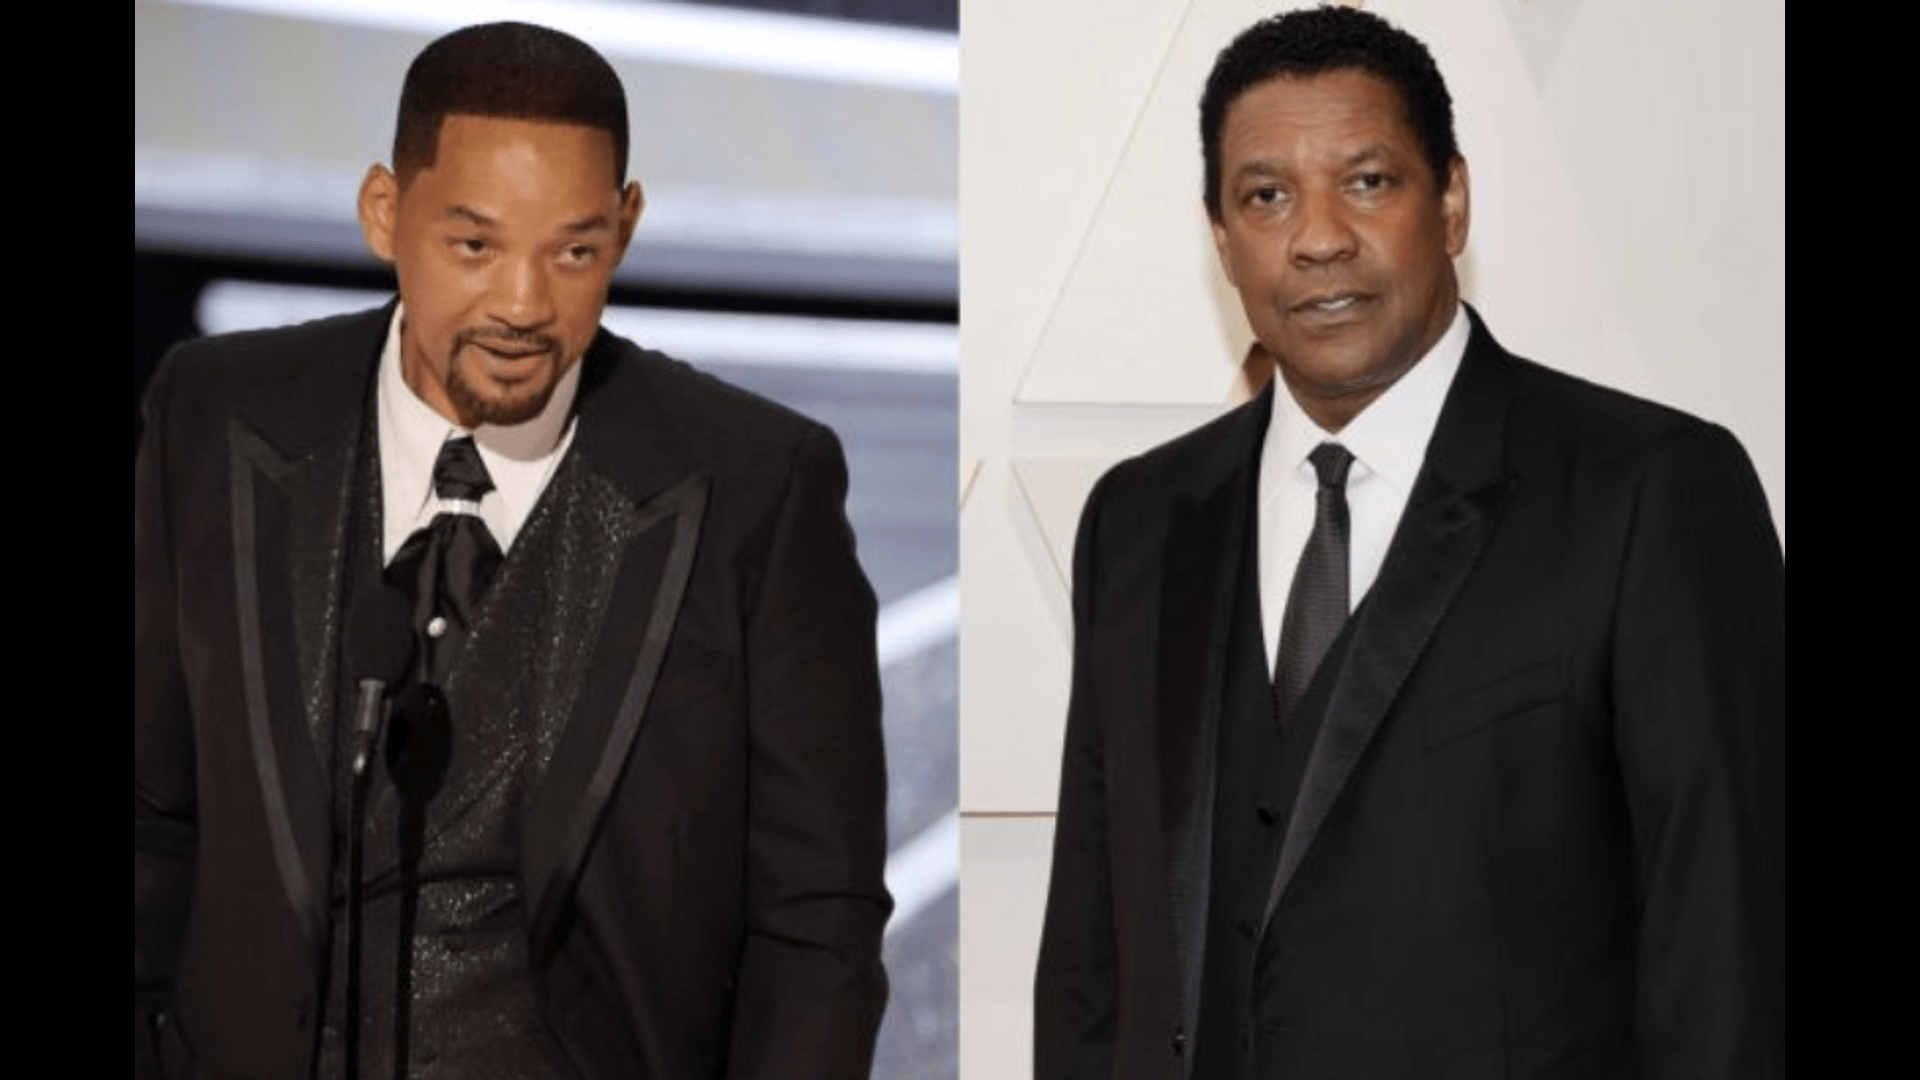 Denzel Washington defends Will Smith: "It could have happened to anyone